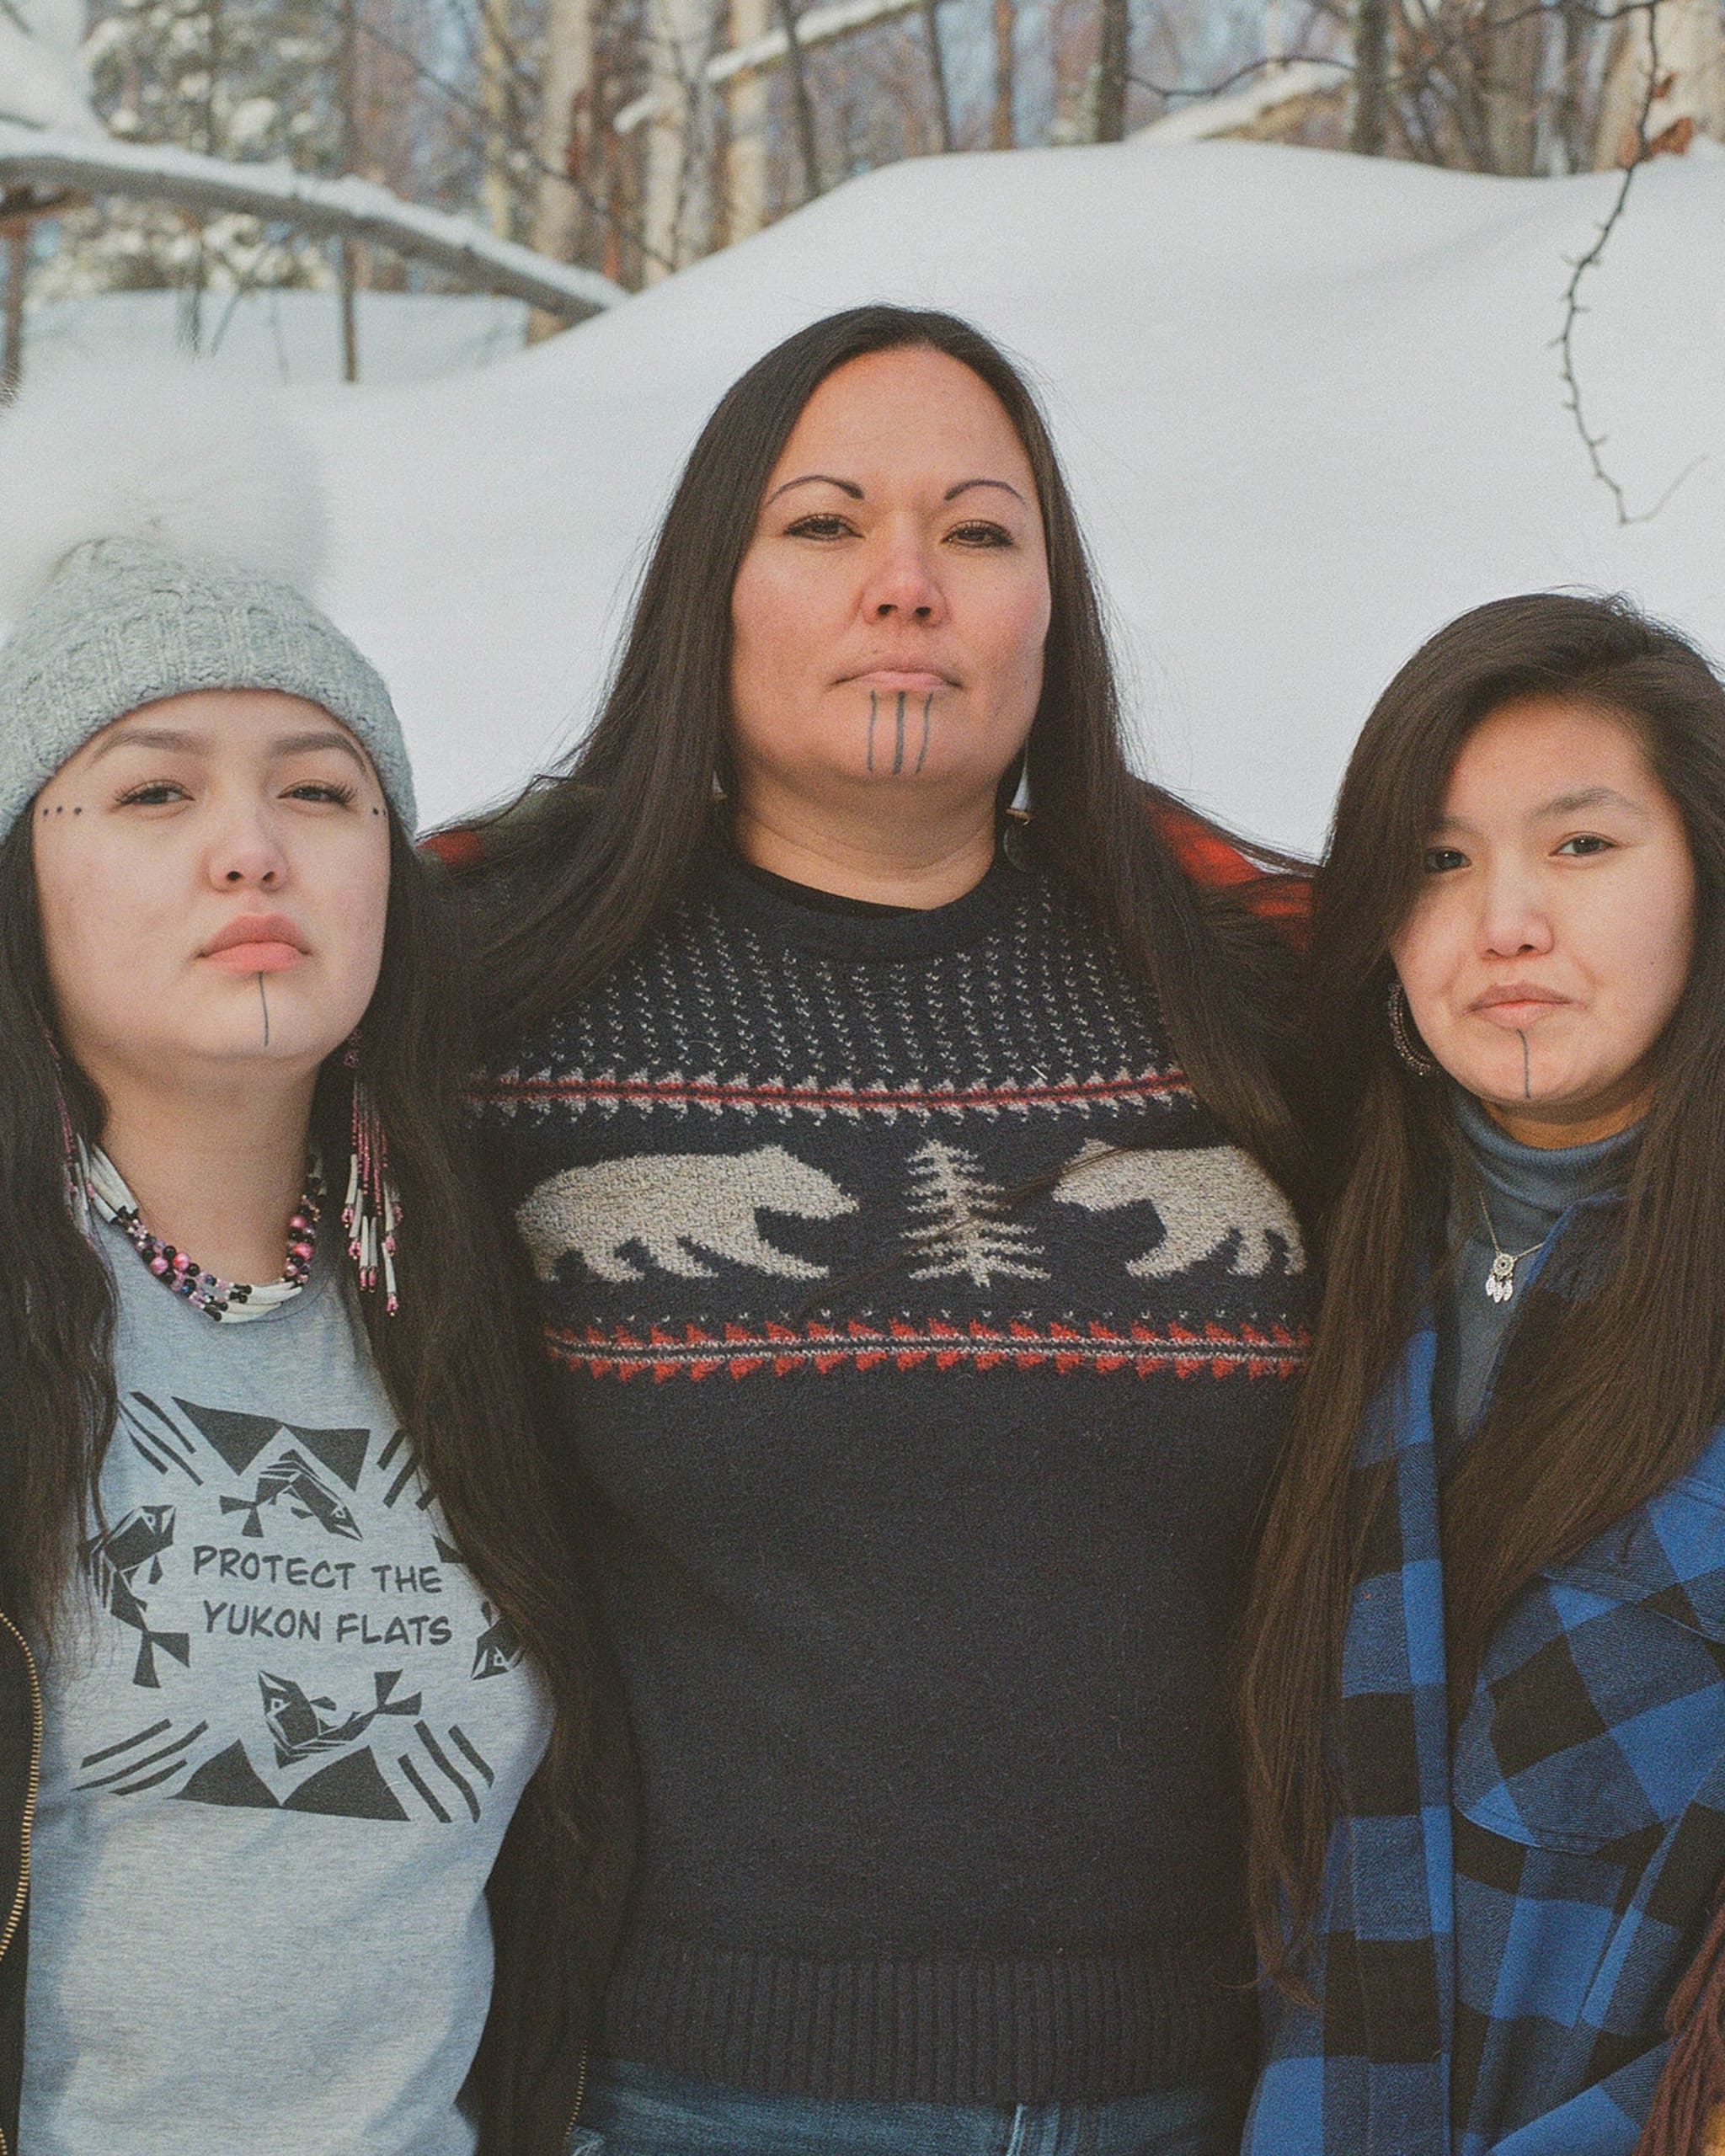 Jody Potts-Joseph with her nieces, Jaelynn Pitka and Lorena in Village-Center-Simon in Fairbanks with traditional tattoos